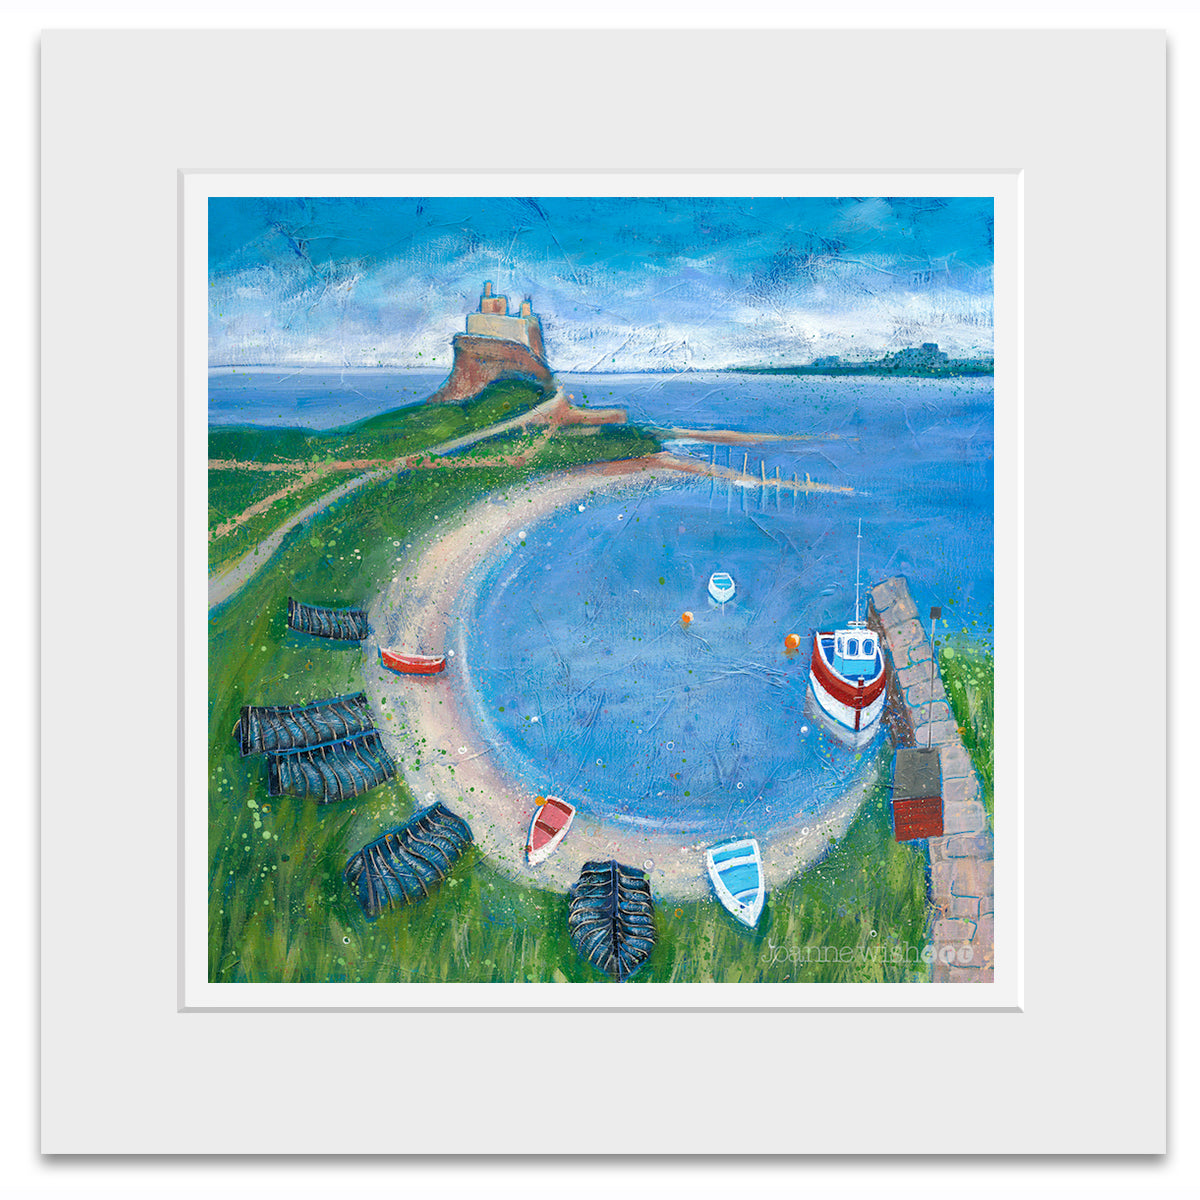 A mounted print of Holy Island Castle in Northumberland with upturned boats in the bay. Painted by local artist Joanne Wishart